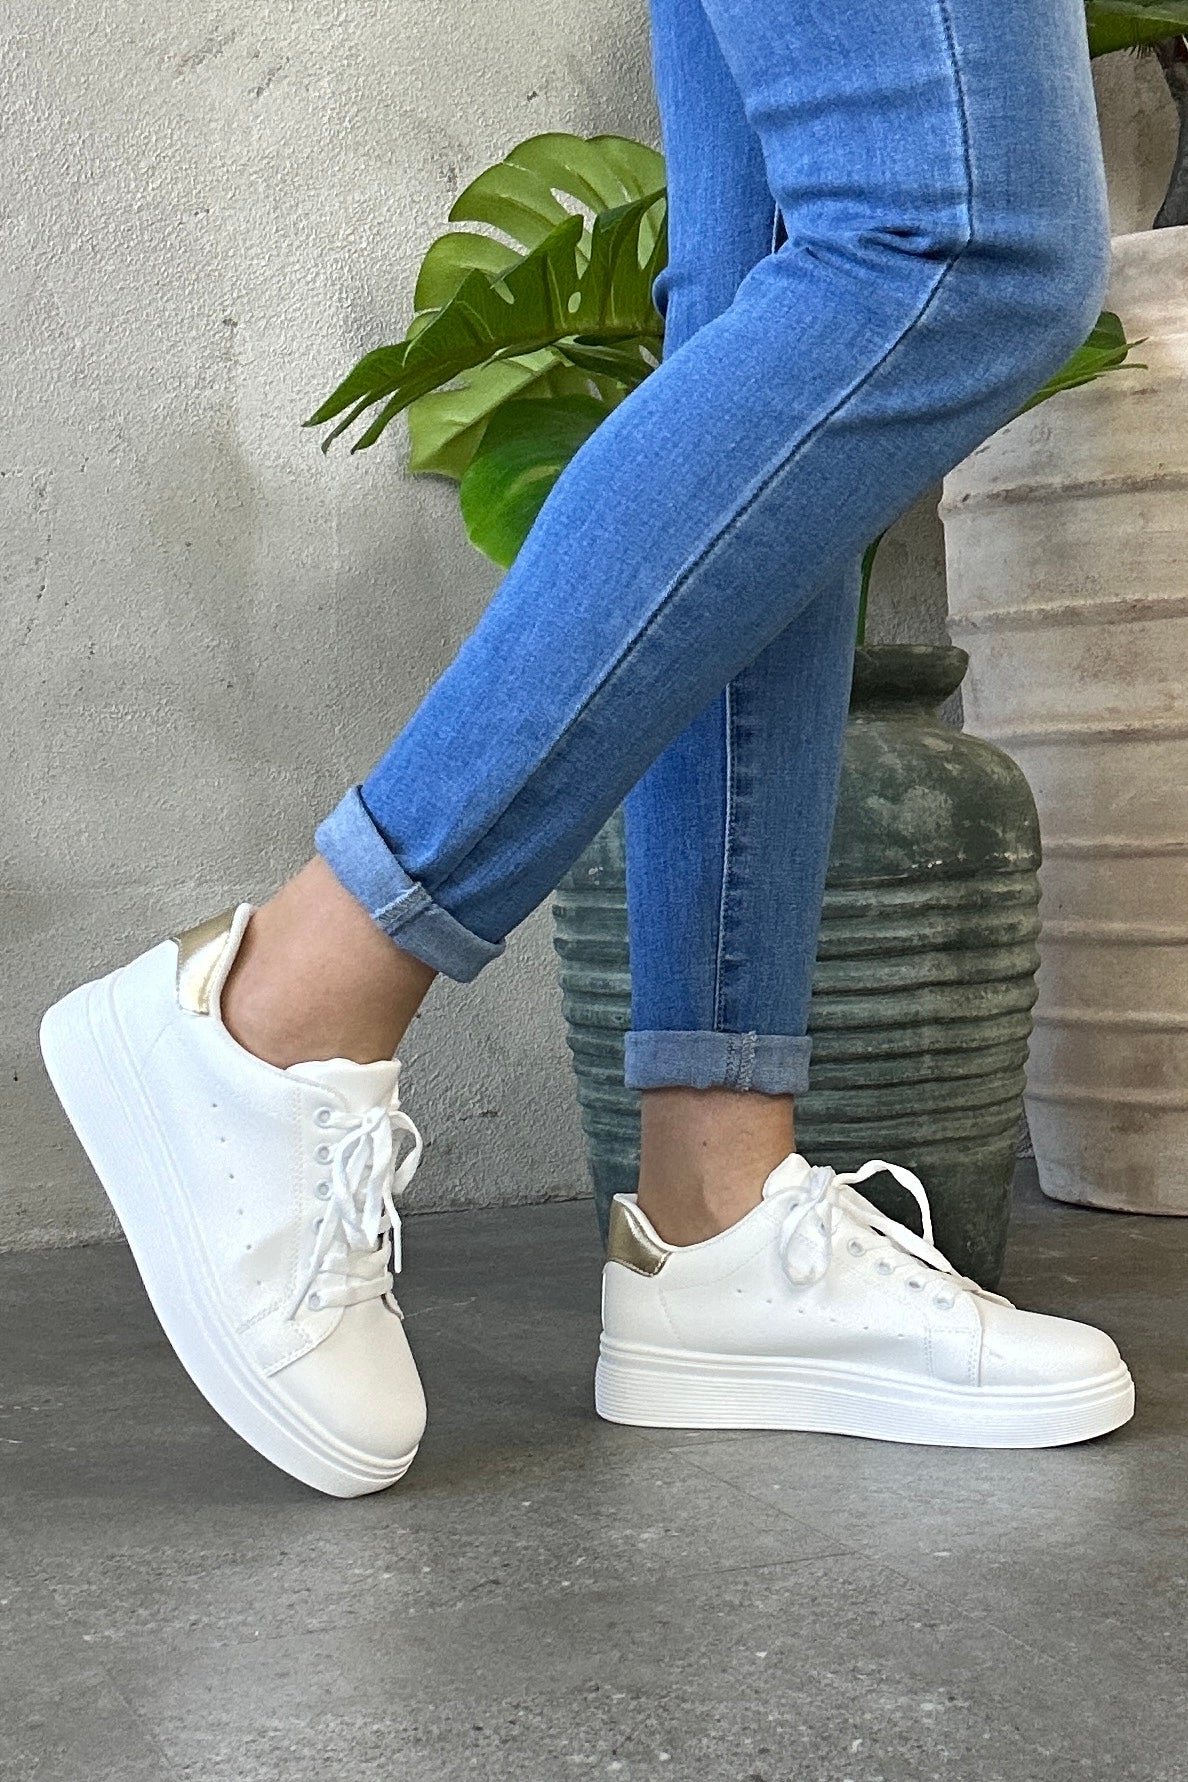 Ellie Sneakers White/Gold